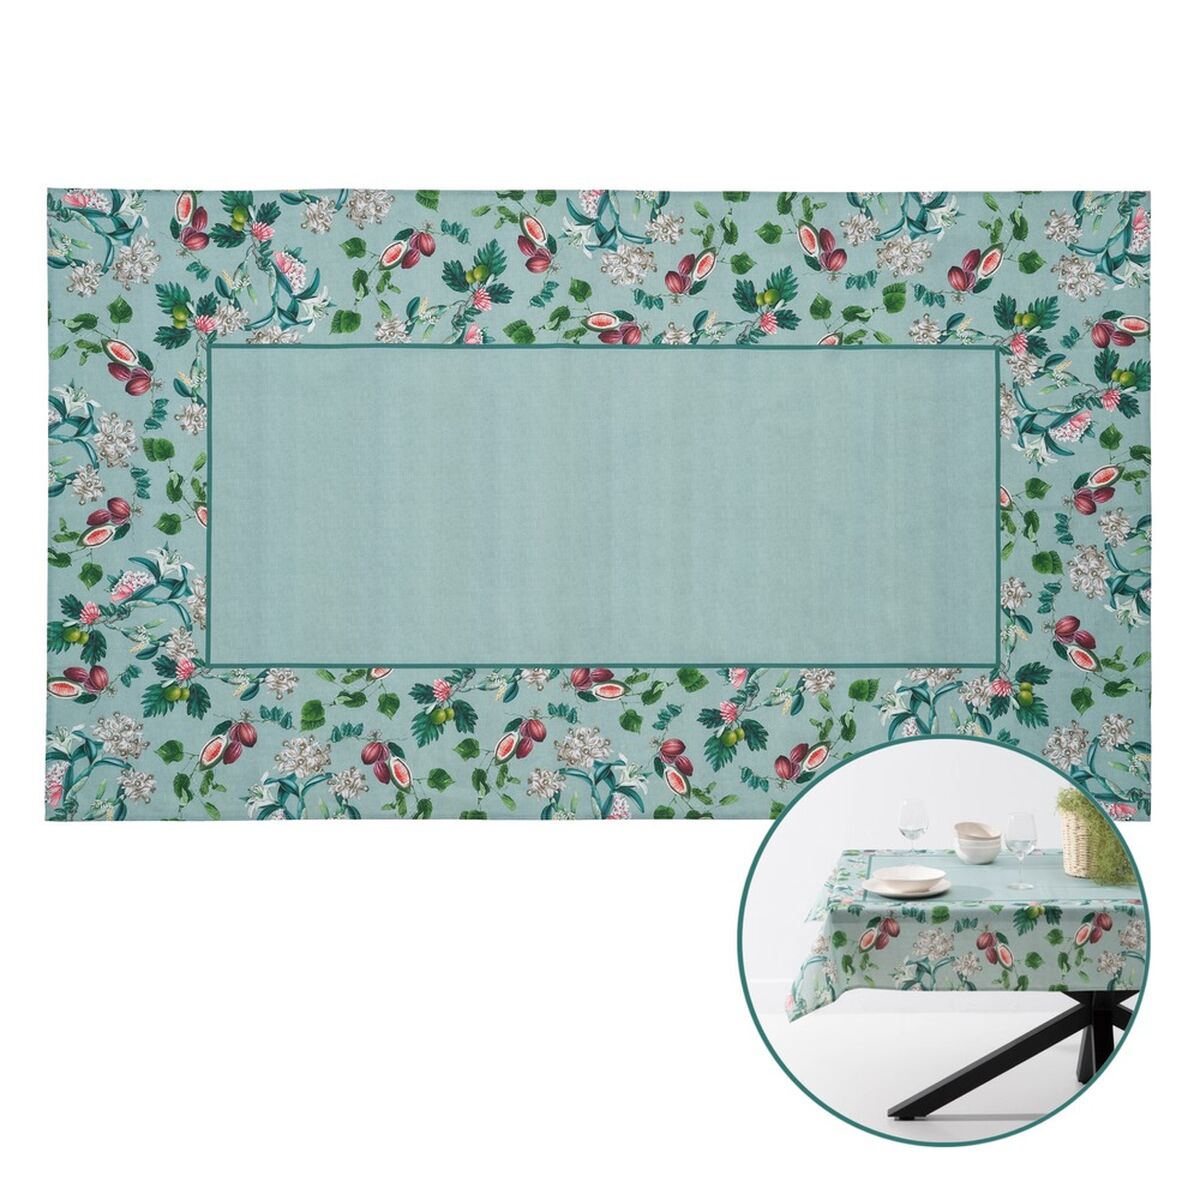 Turquoise Tablecloth Polyester 100% cotton 140 x 240 cm